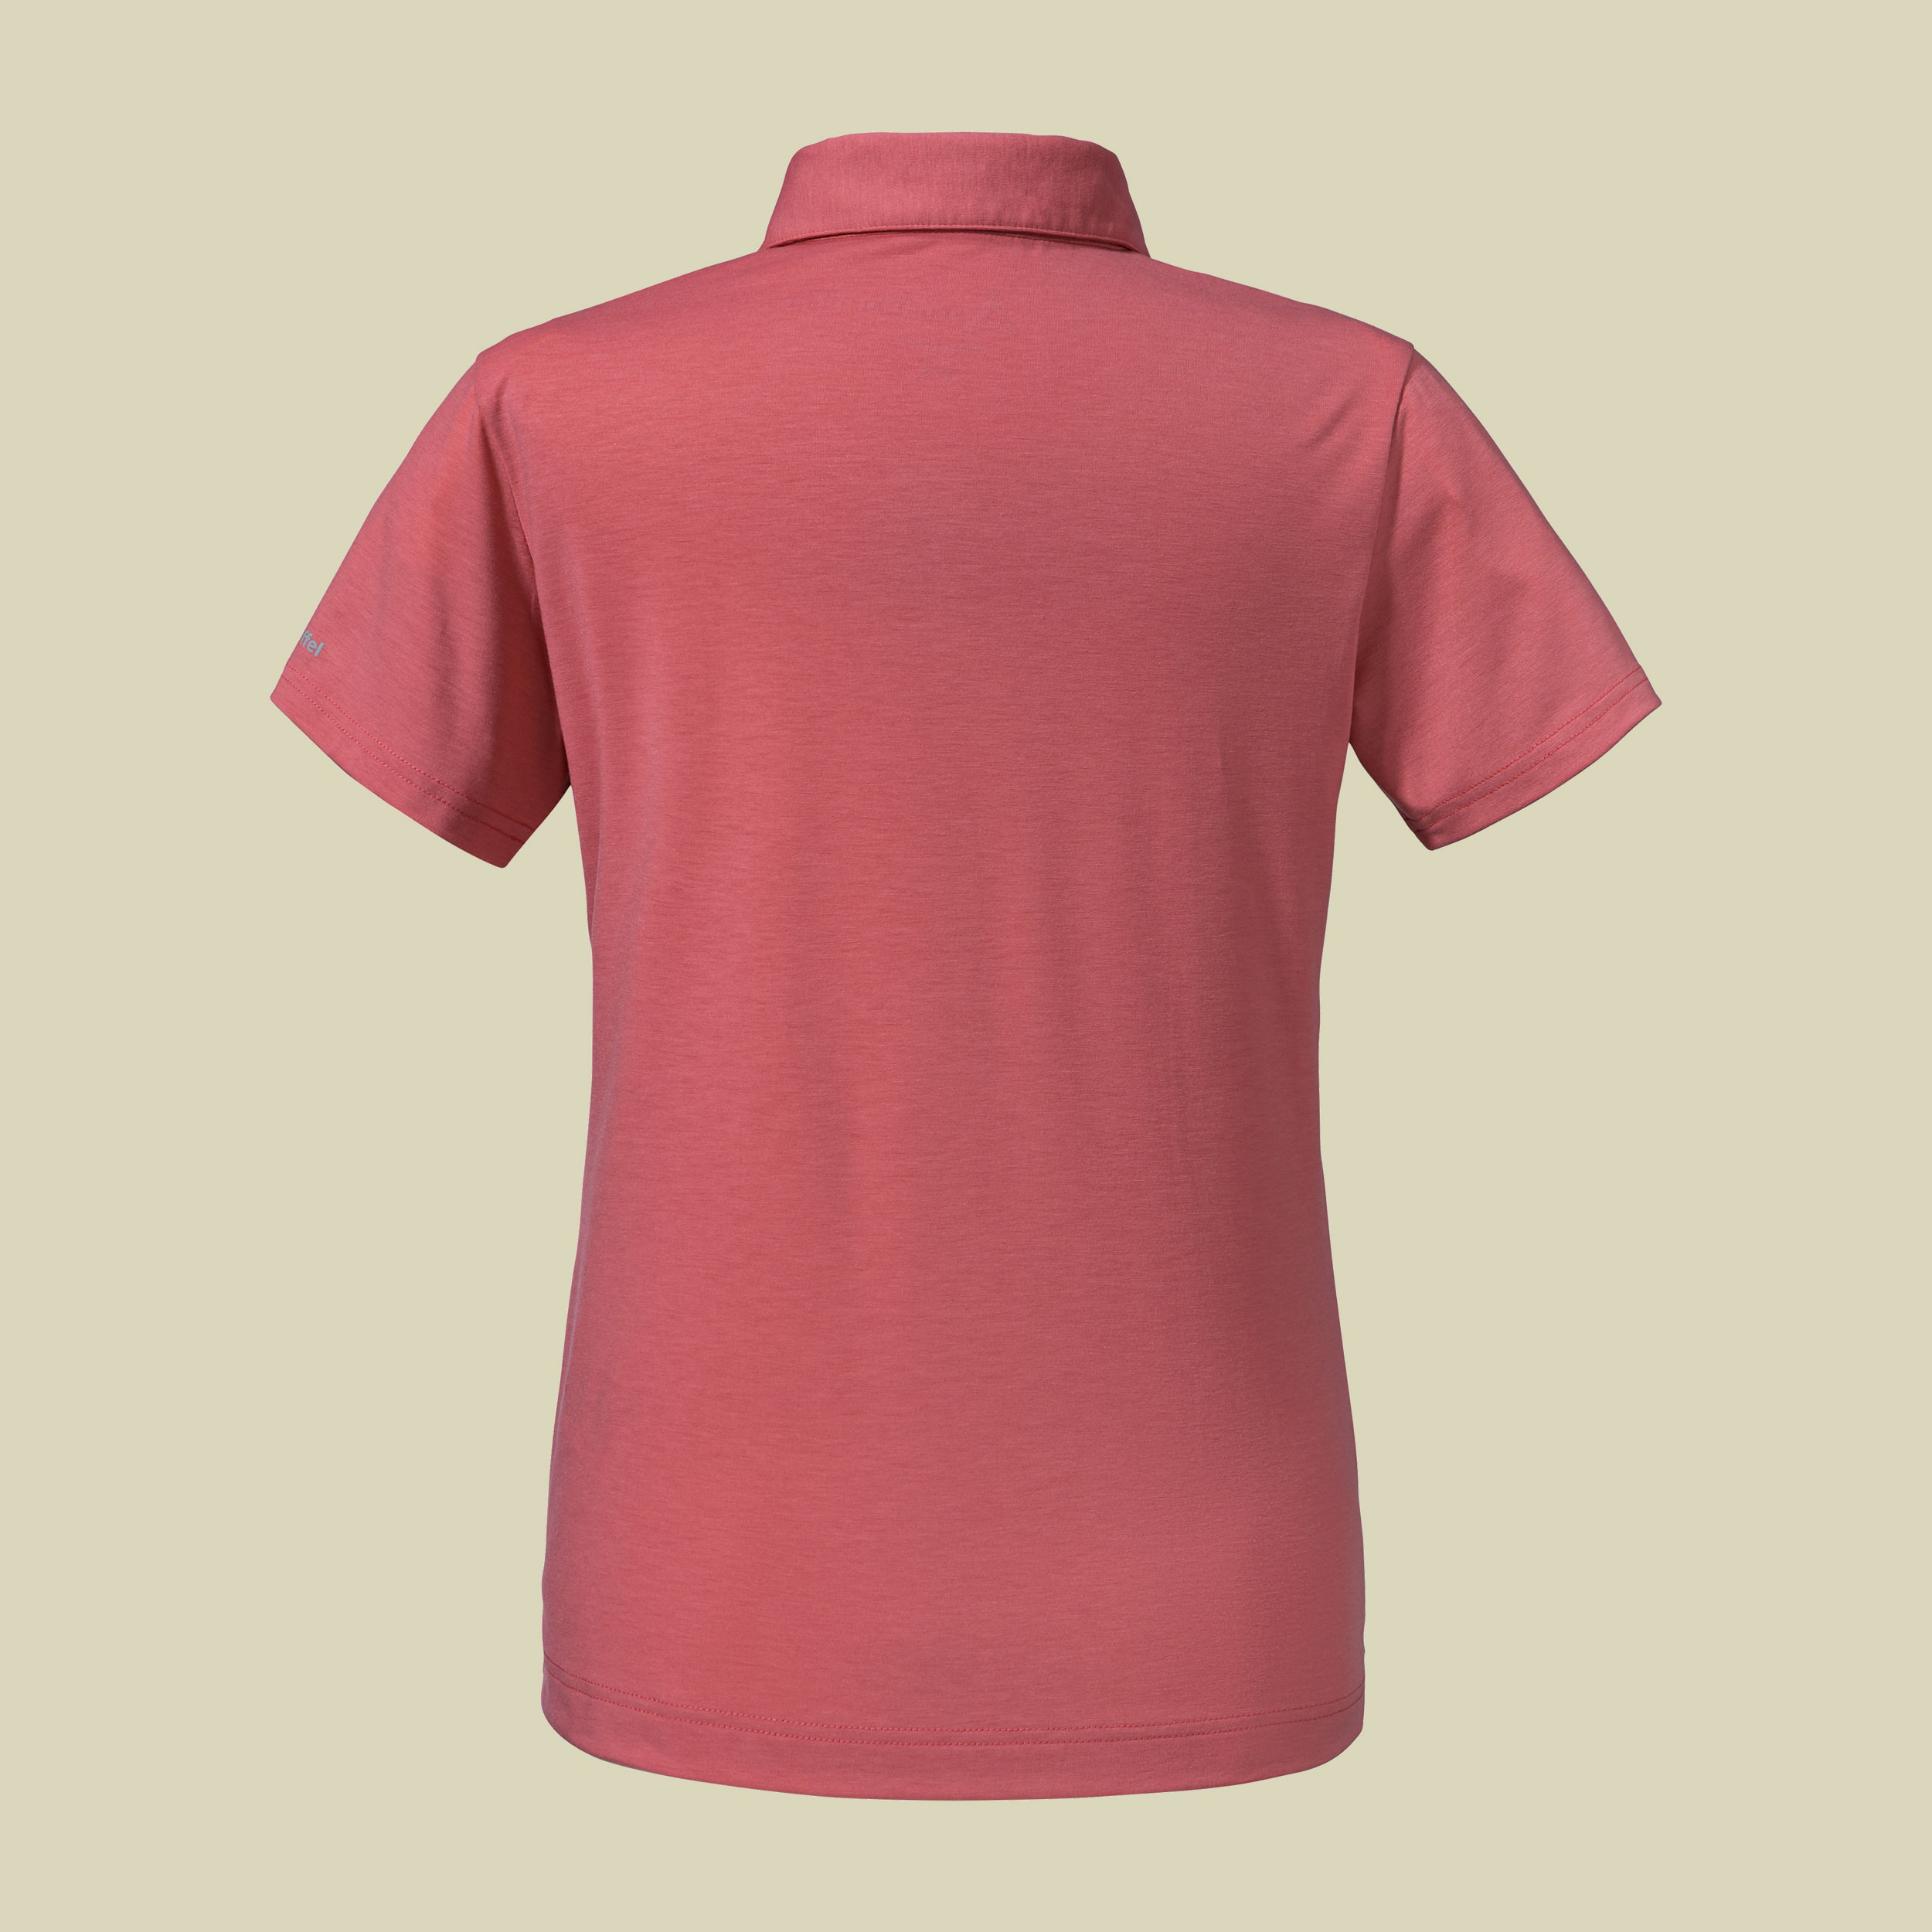 Polo Shirt Ramseck L Women 36 rot - clasping rose